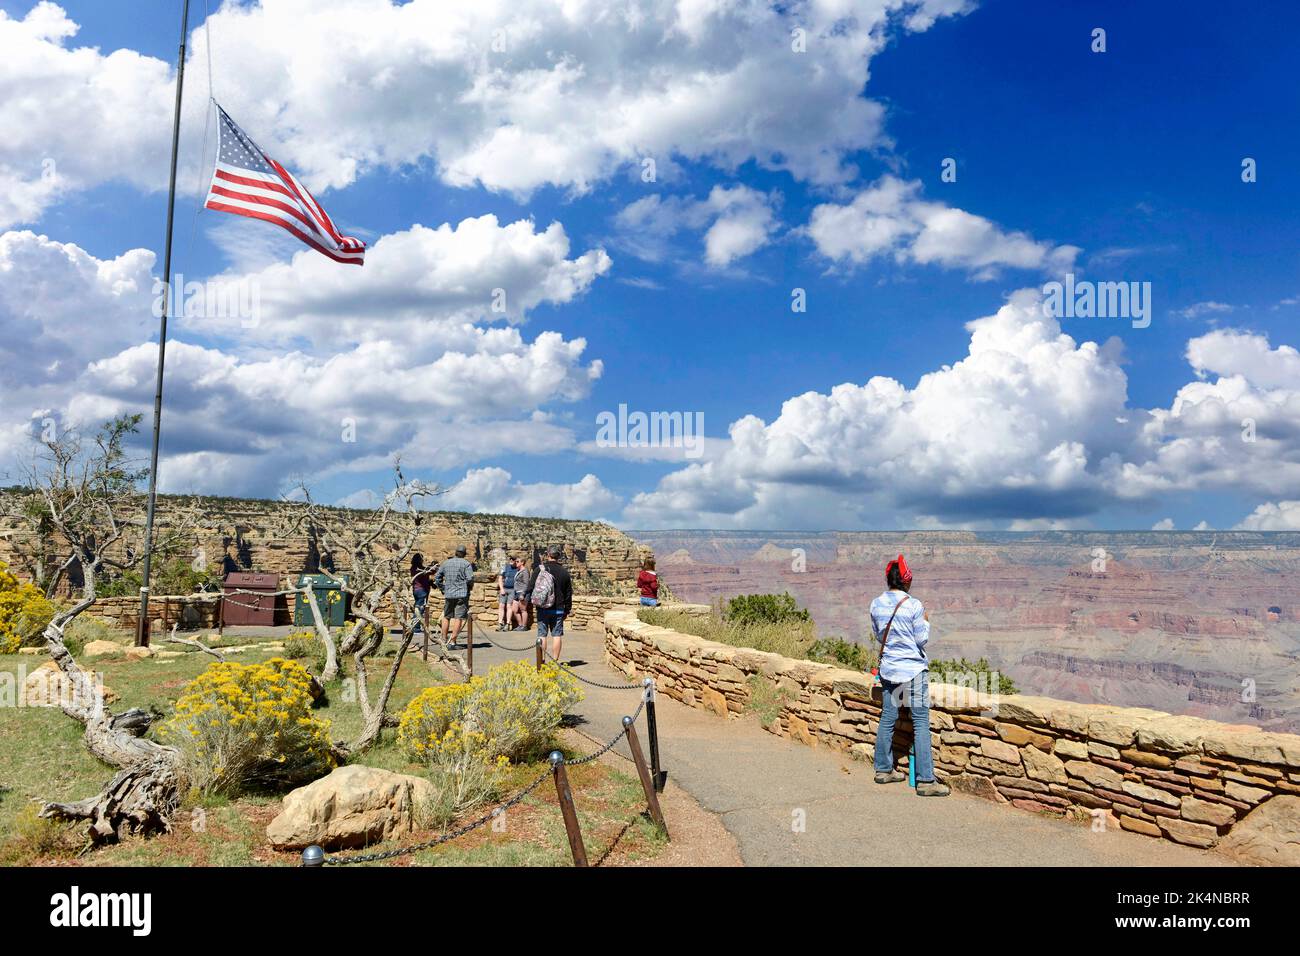 View of the Grand Canyon South Rim from behind the El Tovar Hotel in Arizona Stock Photo